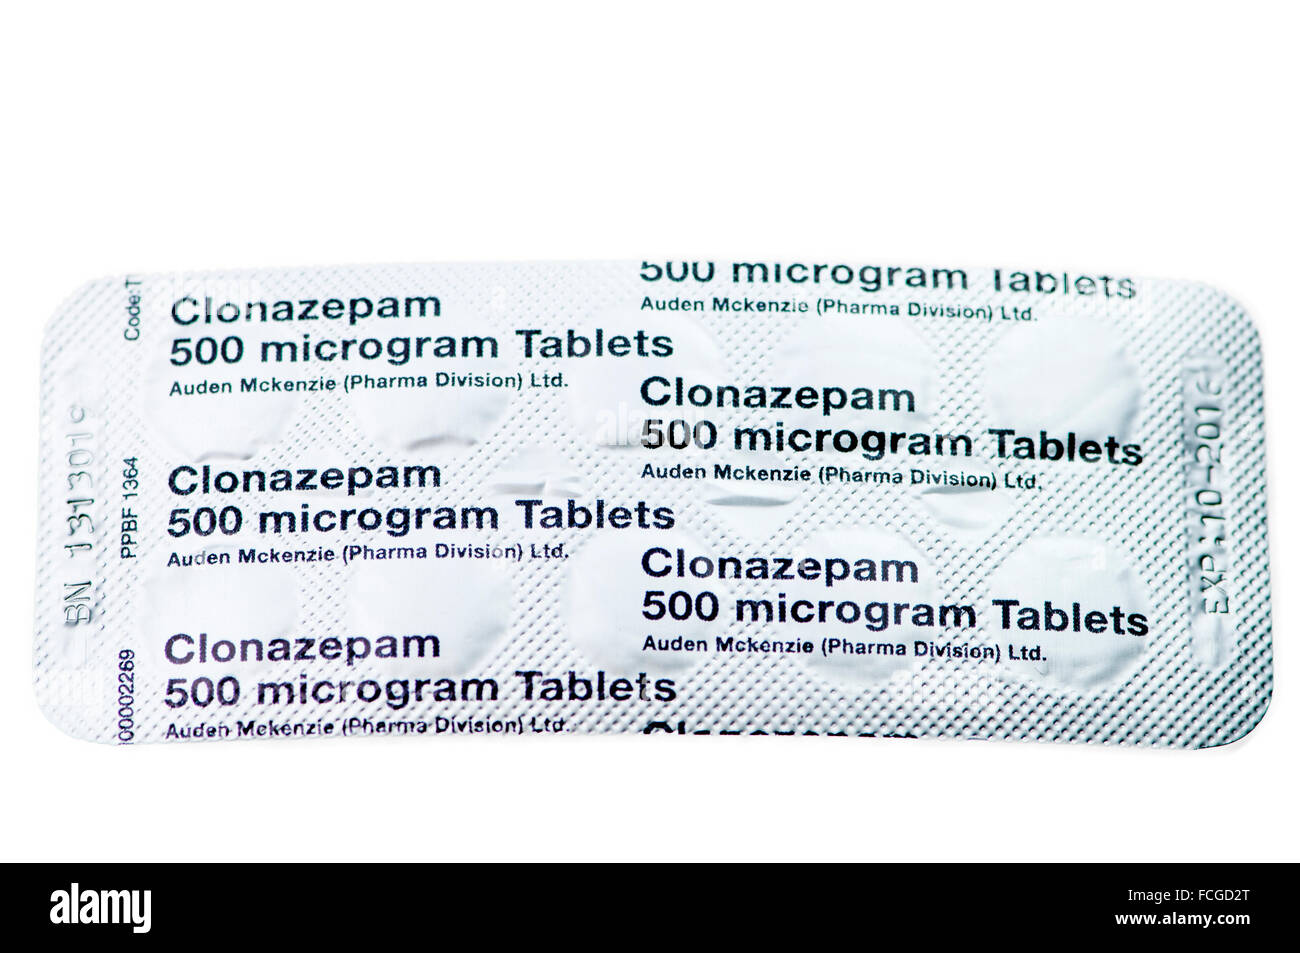 Clonazepam tablets, used to treat brain disorders including epilepsy Stock Photo